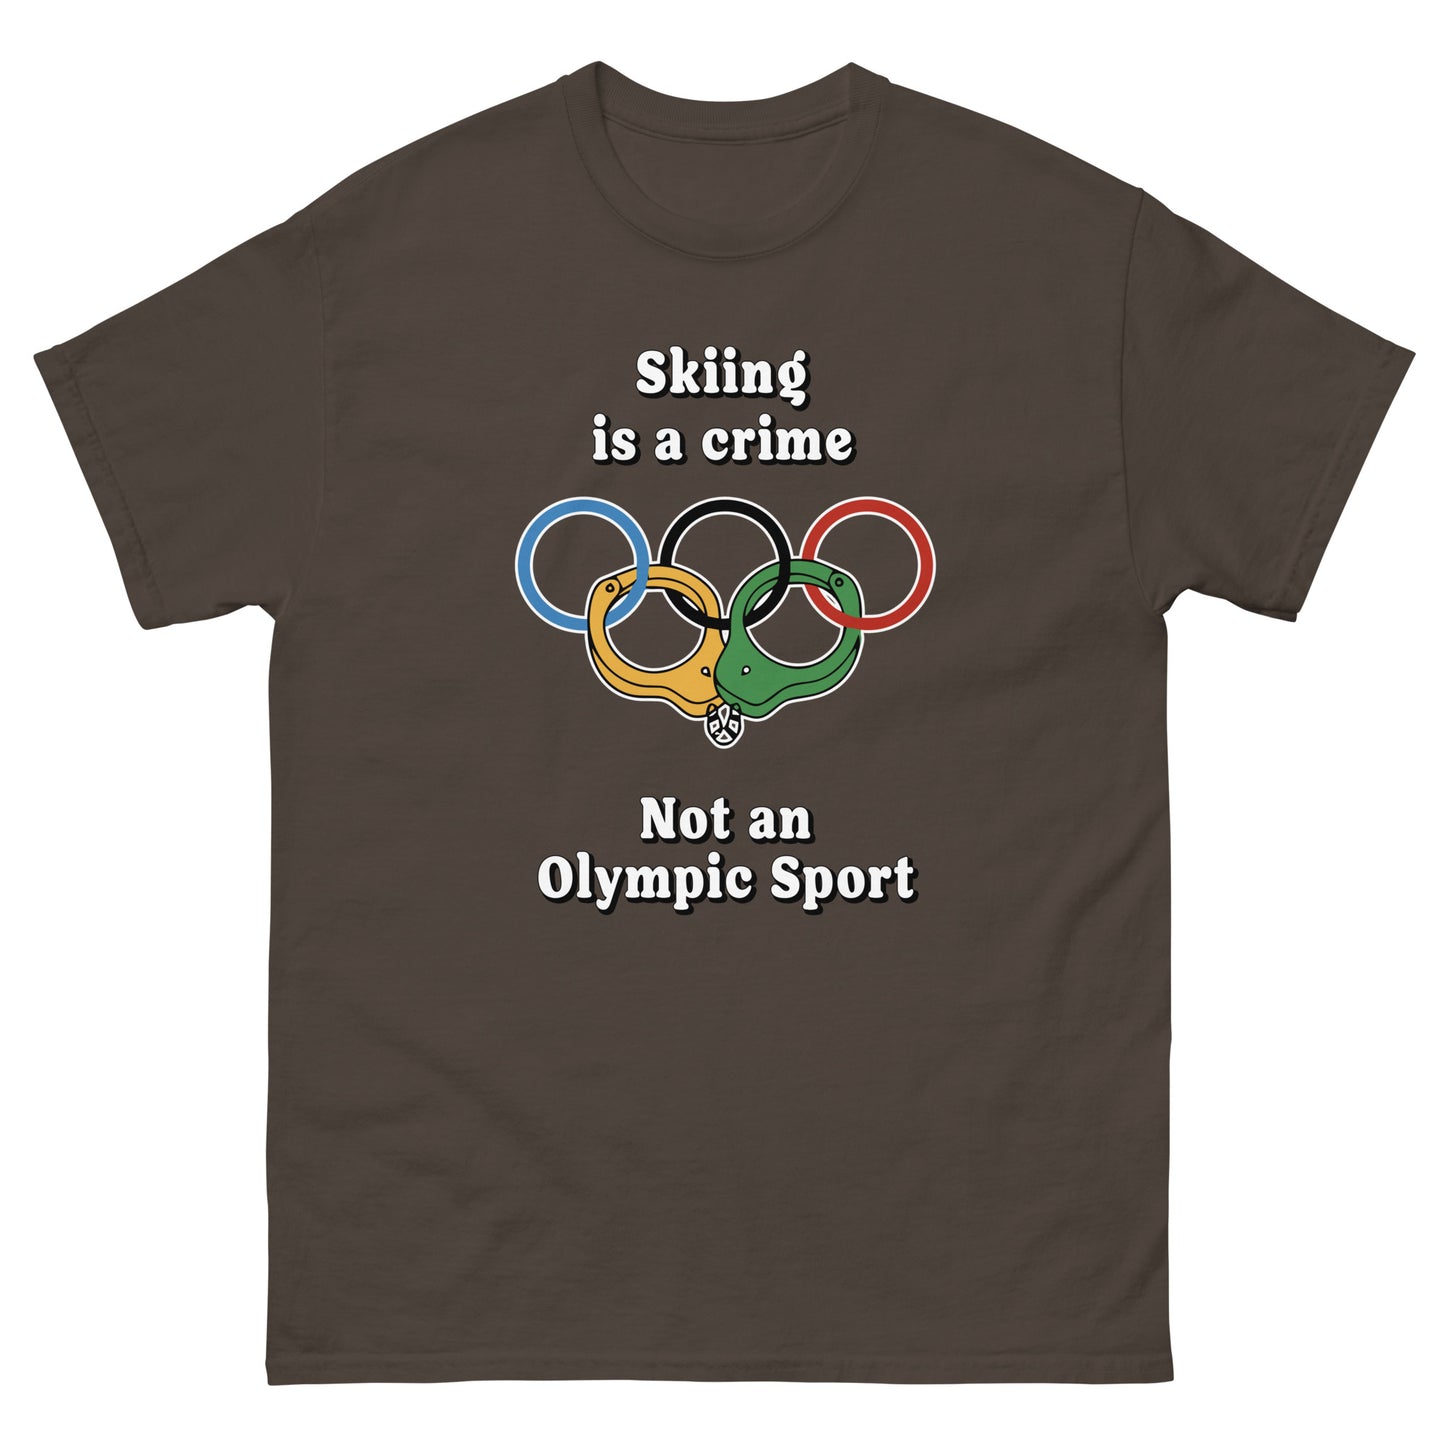 Skiing is a Crime T-shirt